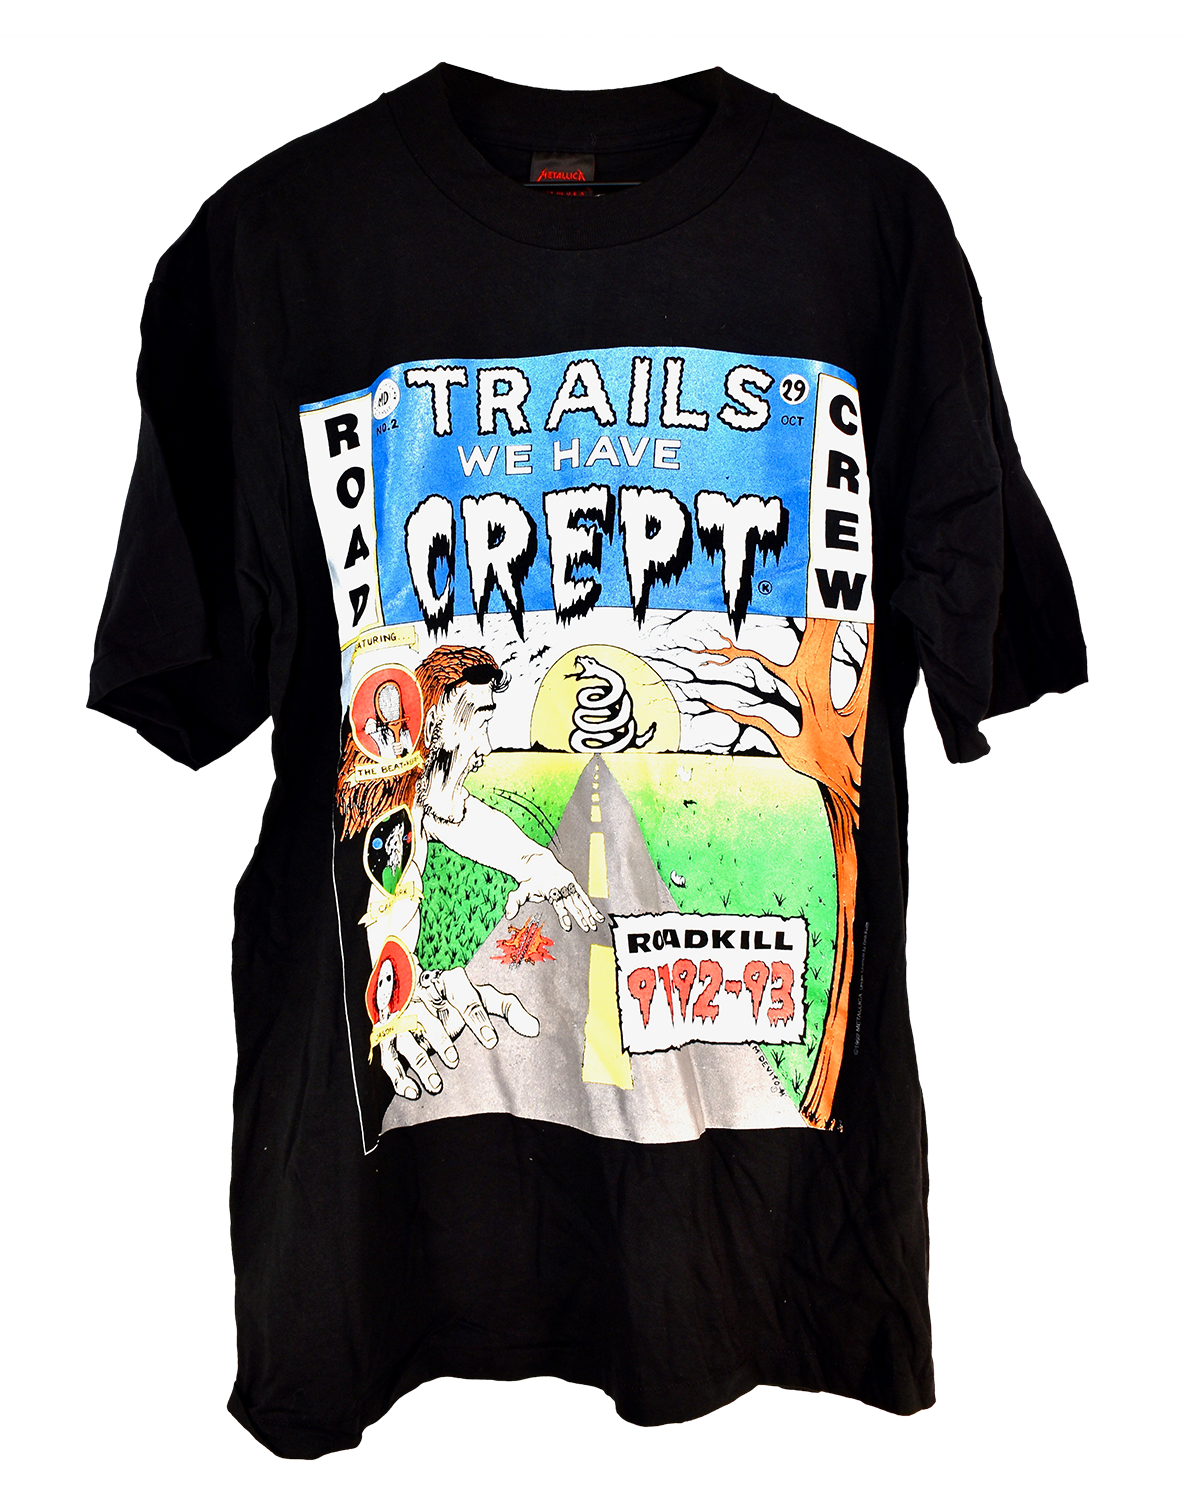 “Trails We Have Crept” T-Shirt